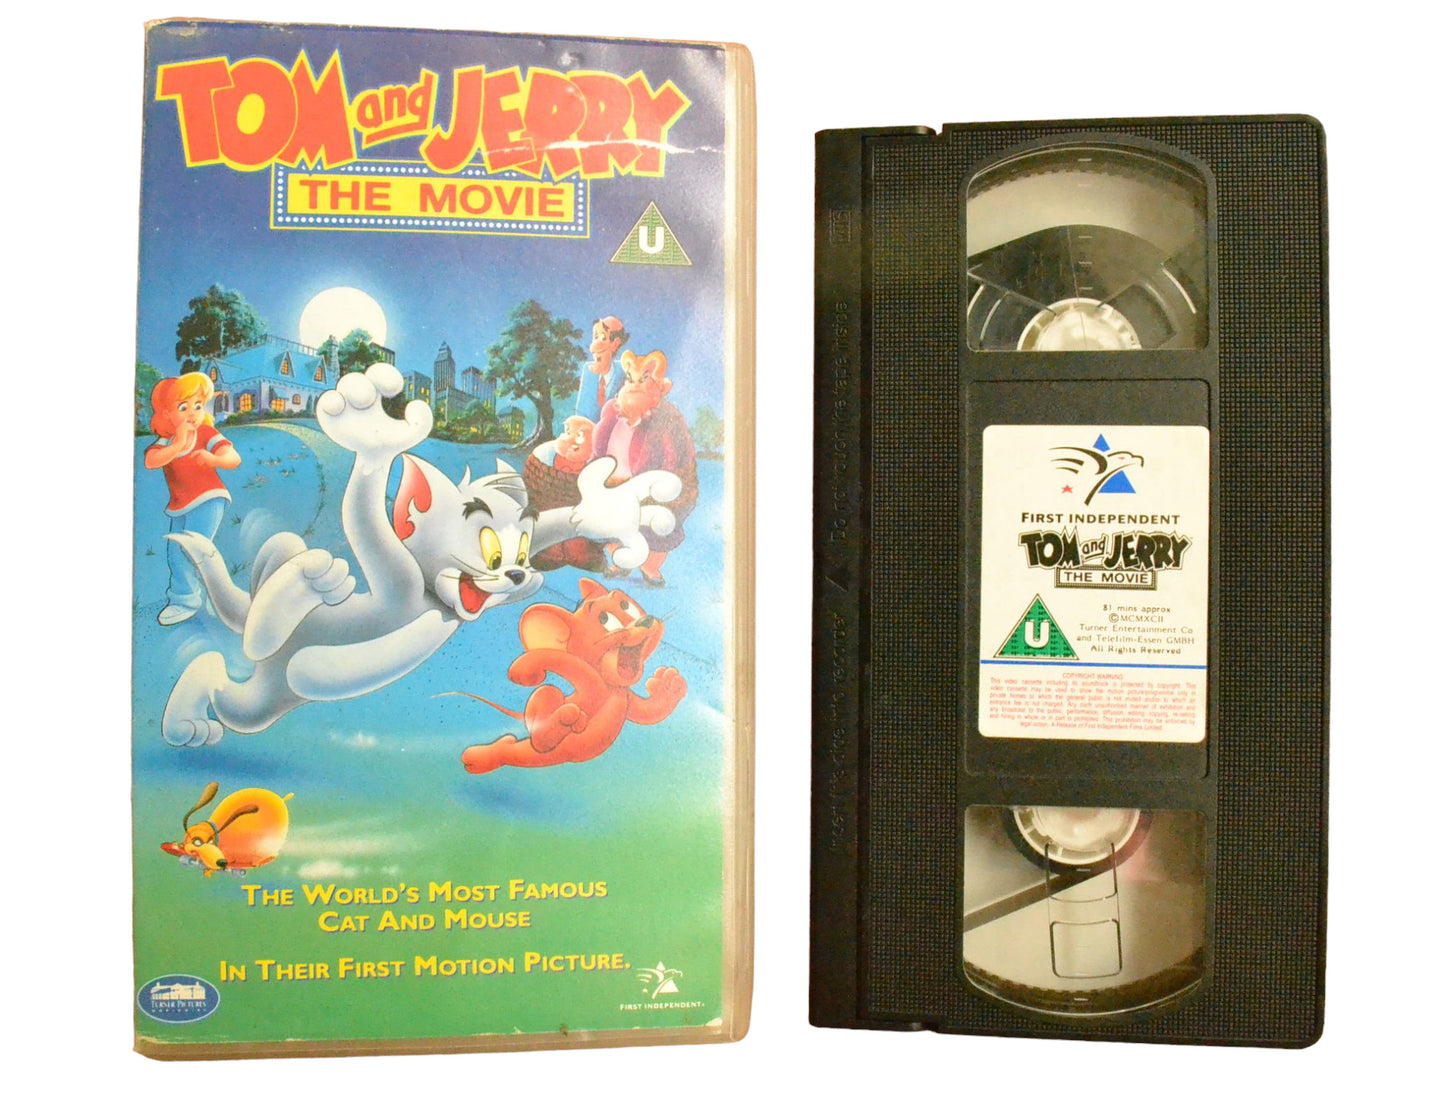 Tom and Jerry The Movie - First Independent - Childrens - PAL - VHS-